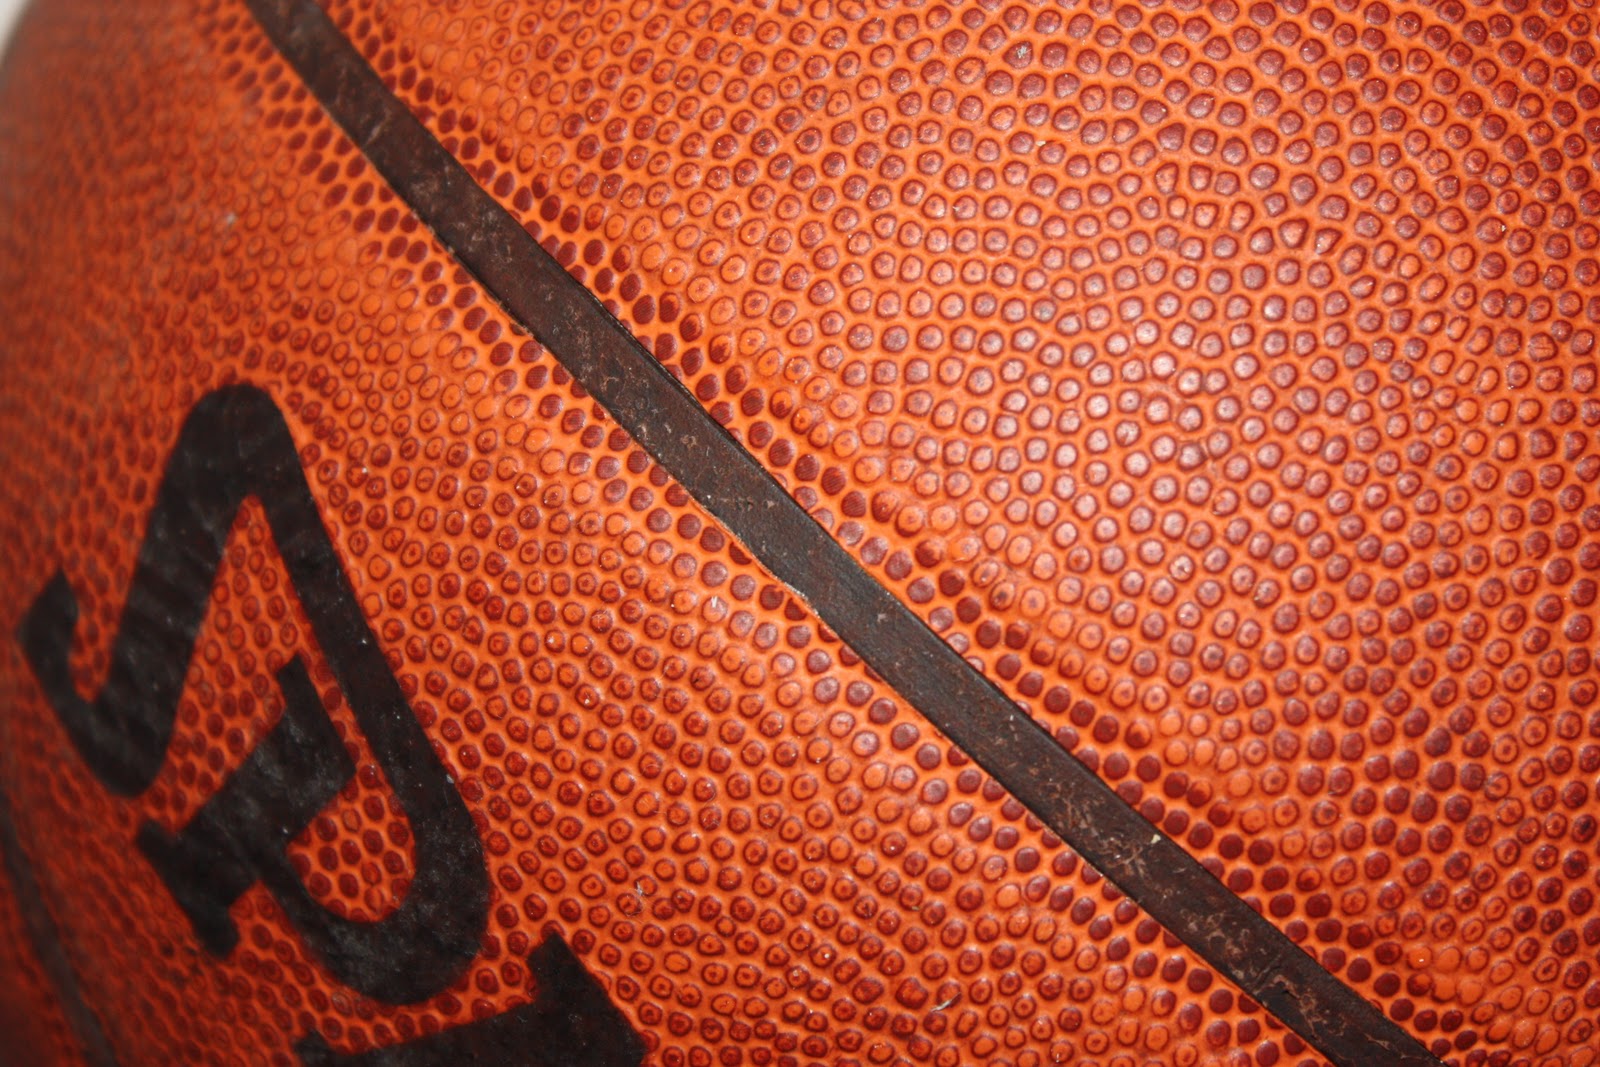 The Number Zero: Basketball Textures, One, Two, & Three